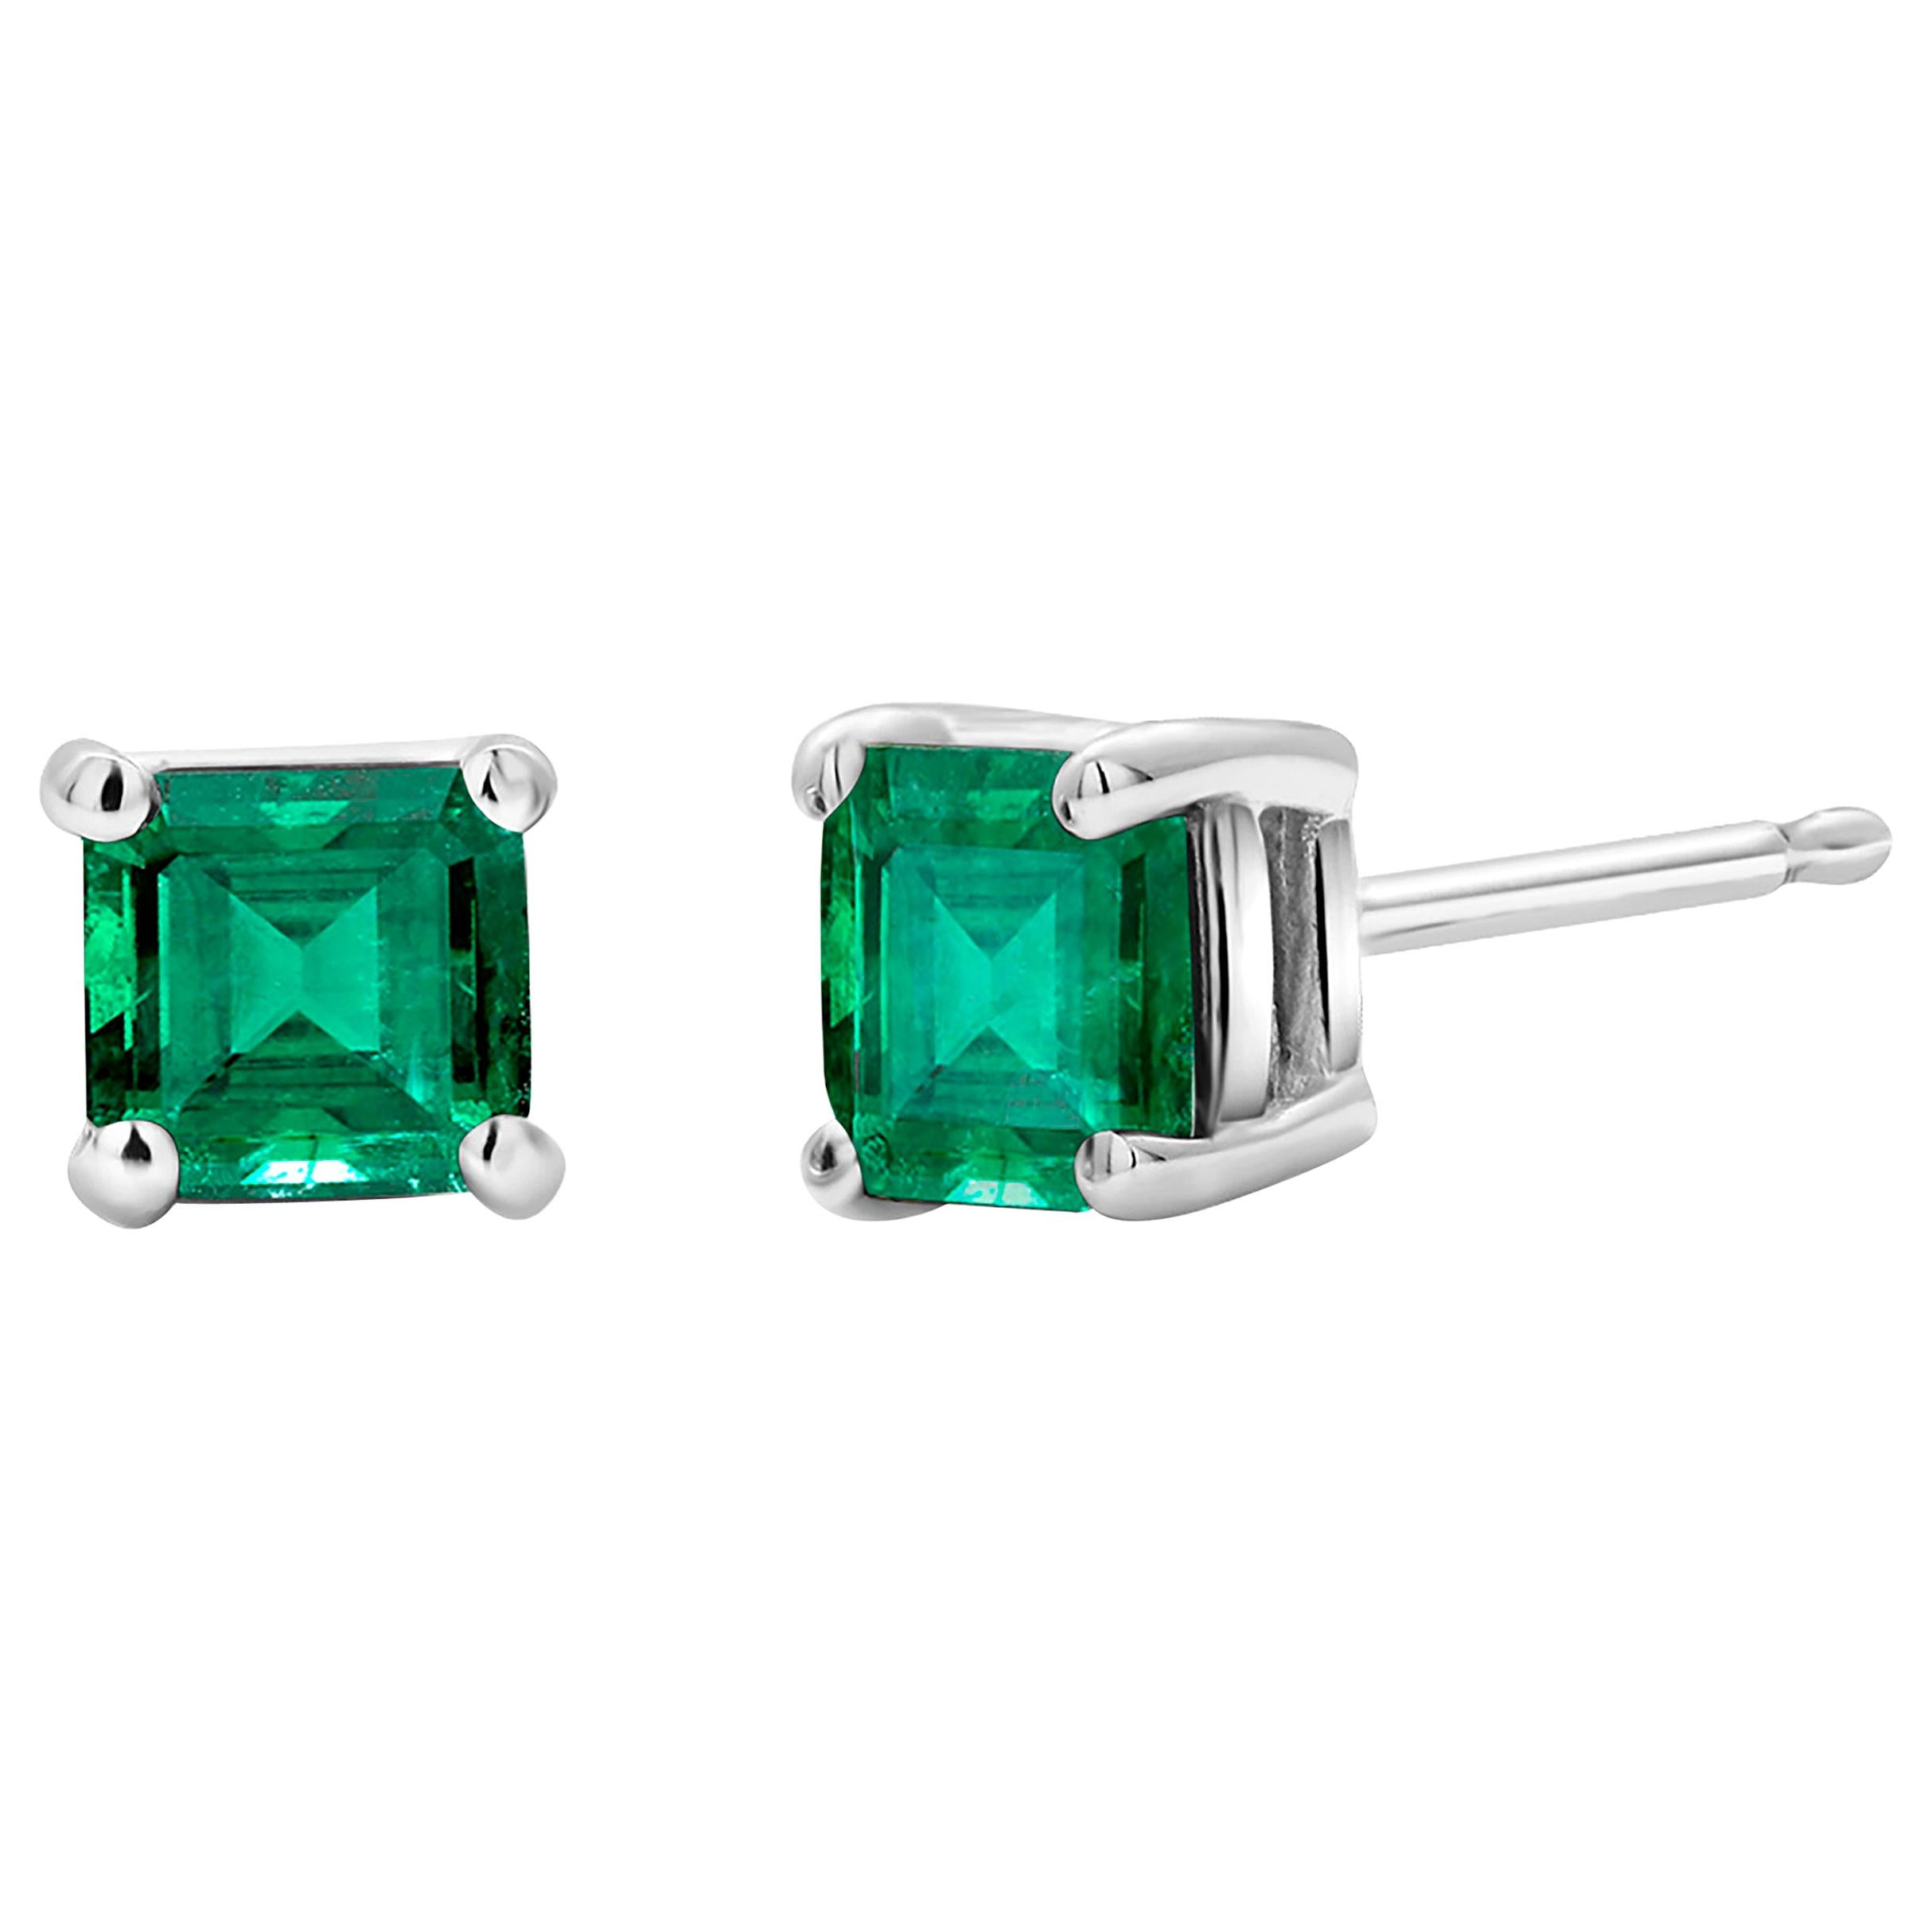 Emerald Cut Colombia Emerald White Gold Stud Earrings Weighing 0.80 Carats 